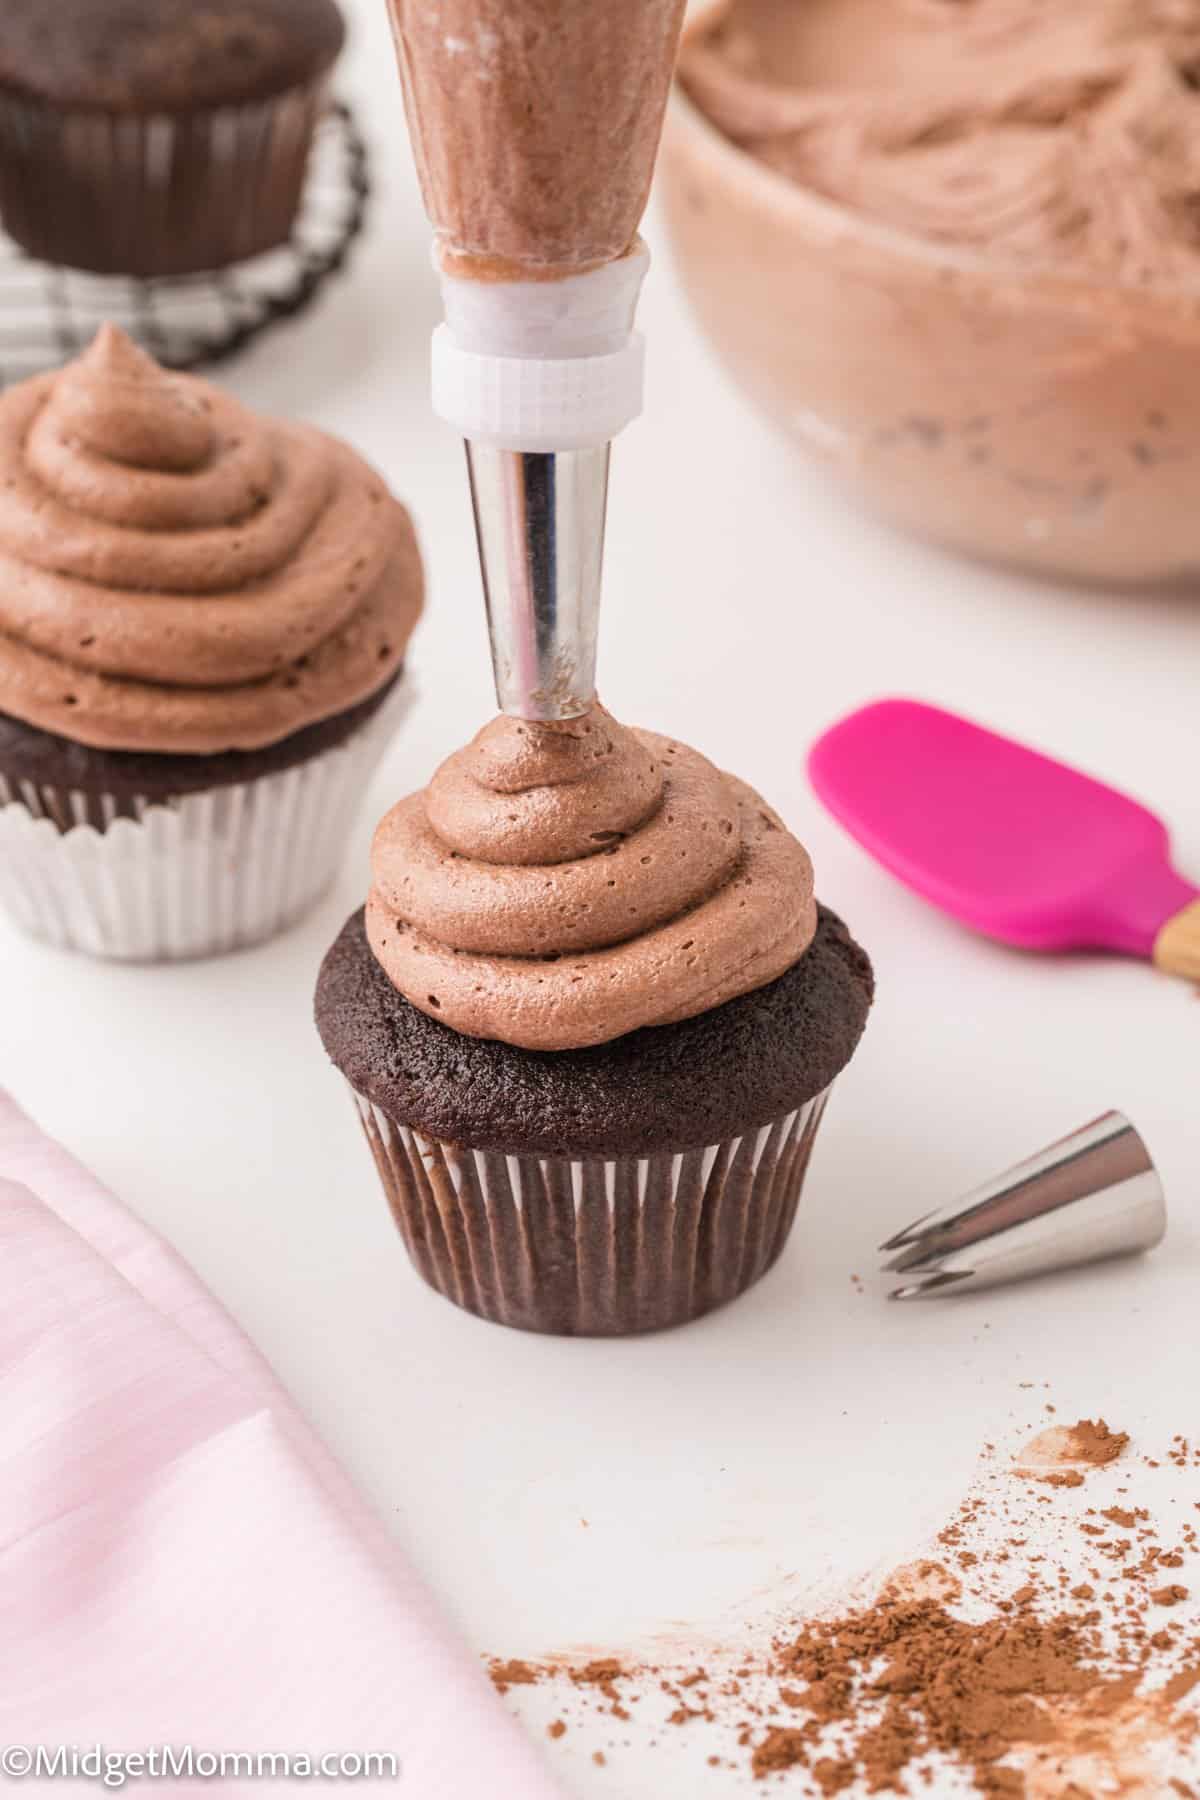 chocolate buttercream frosting being piped on top of a chocolate cupcake.